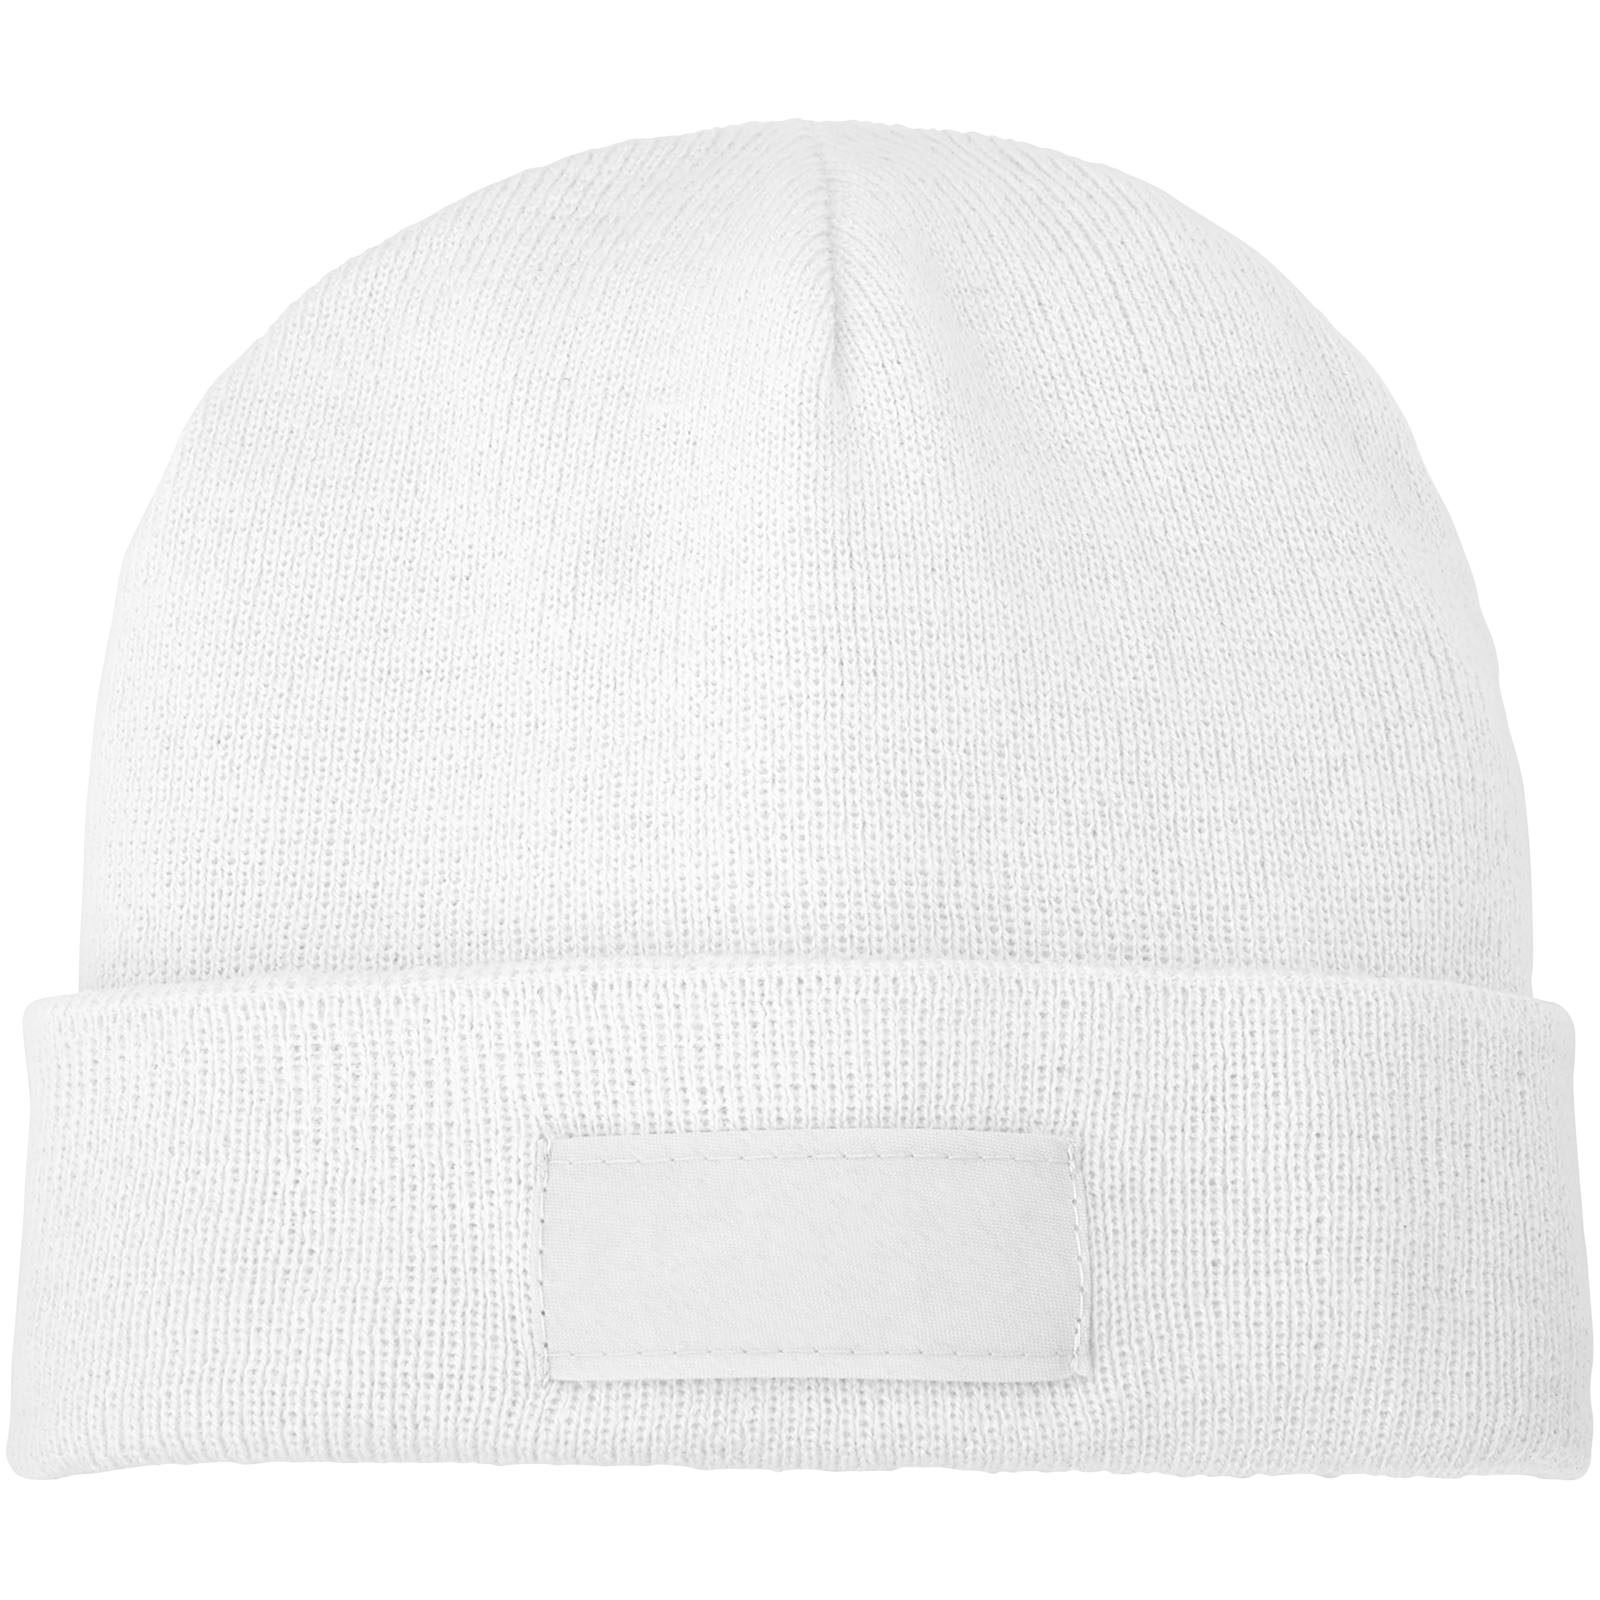 Advertising Beanies - Boreas beanie with patch - 1